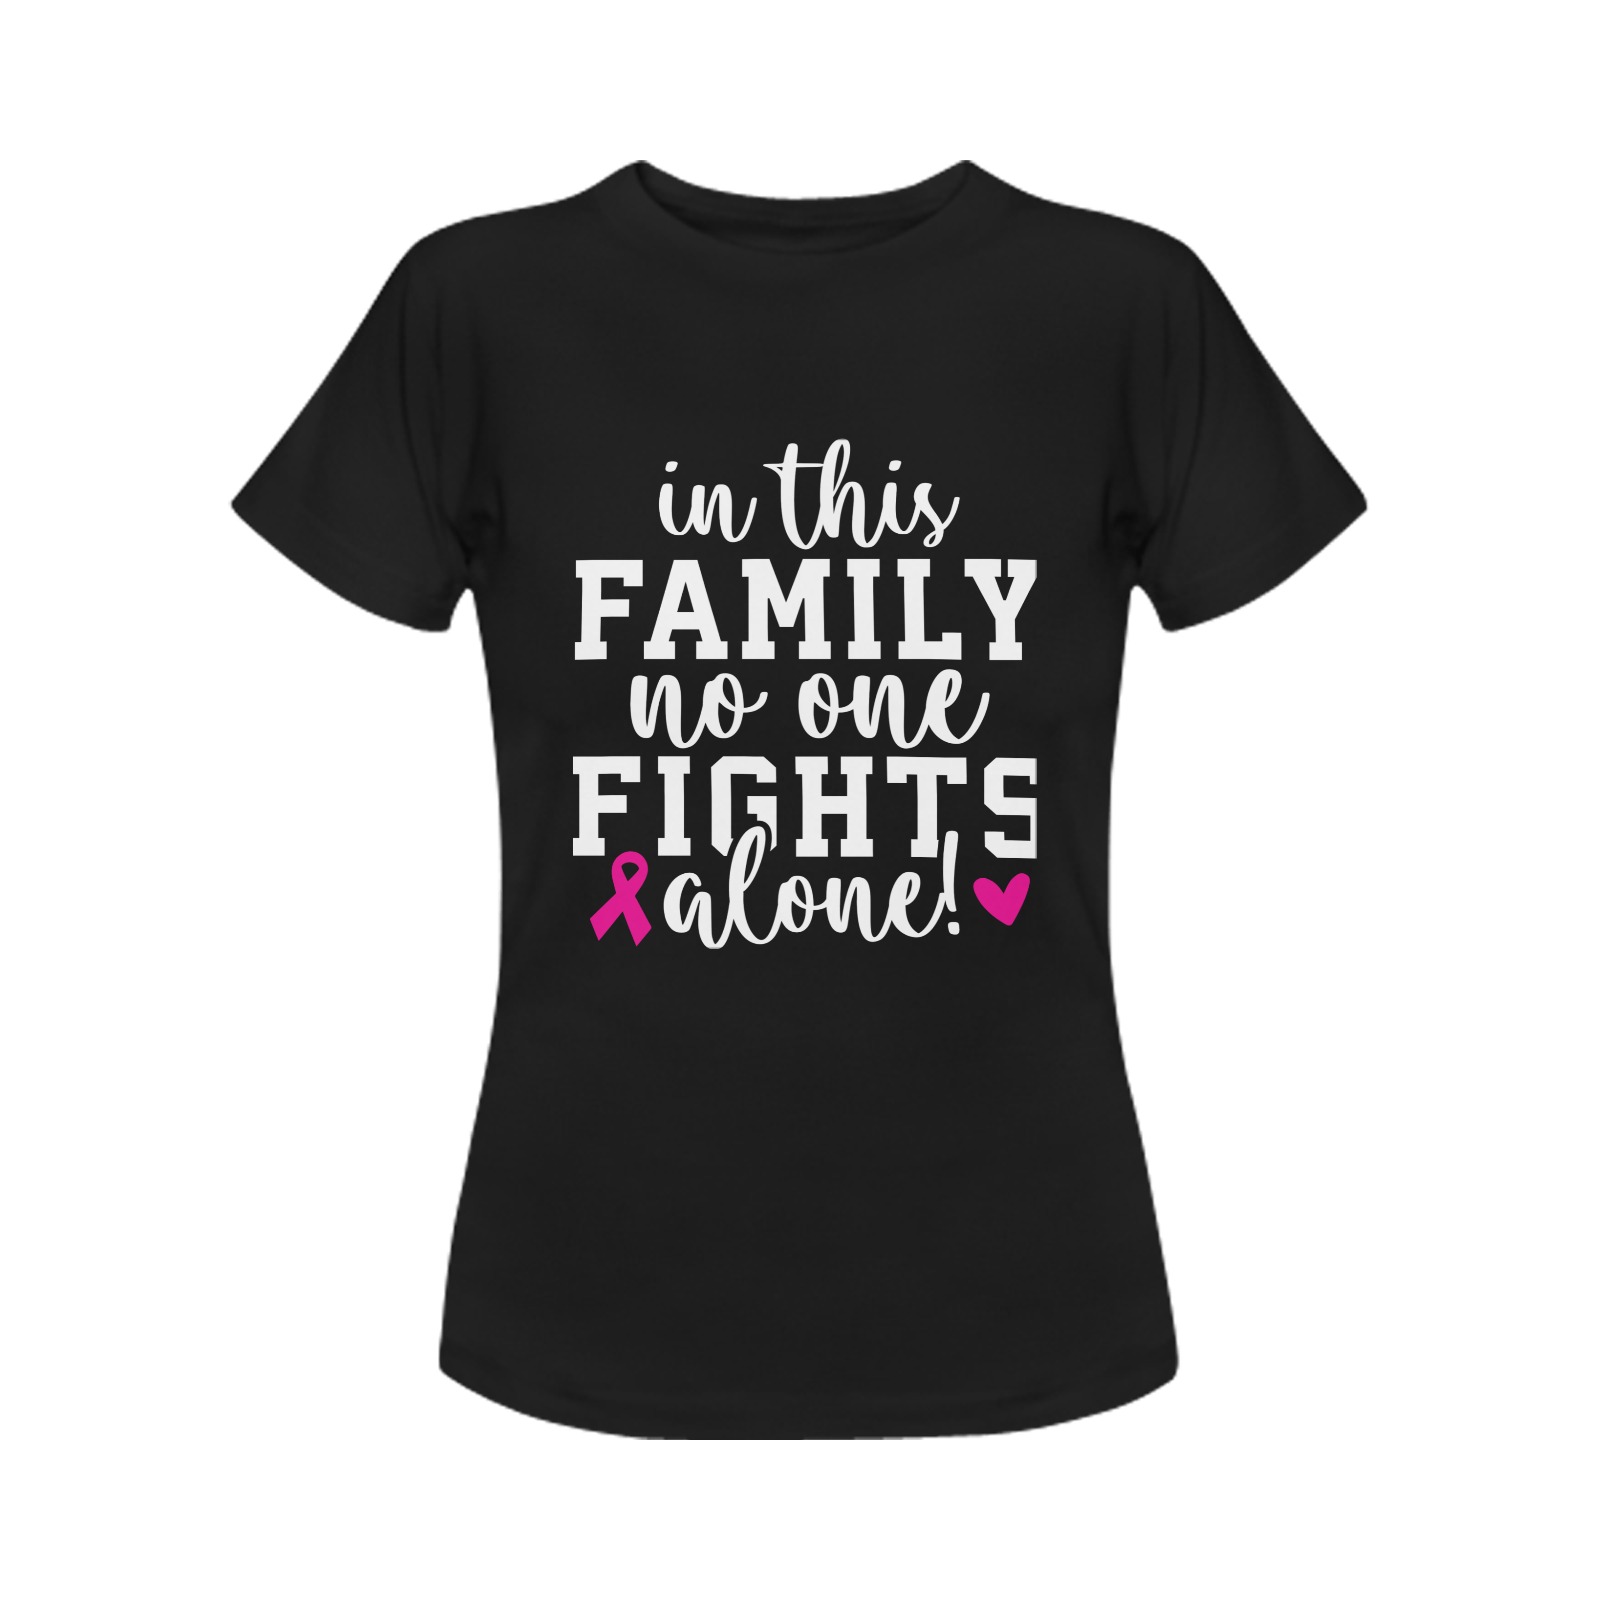 Breast Cancer Awareness2 Women's T-Shirt in USA Size (Two Sides Printing)